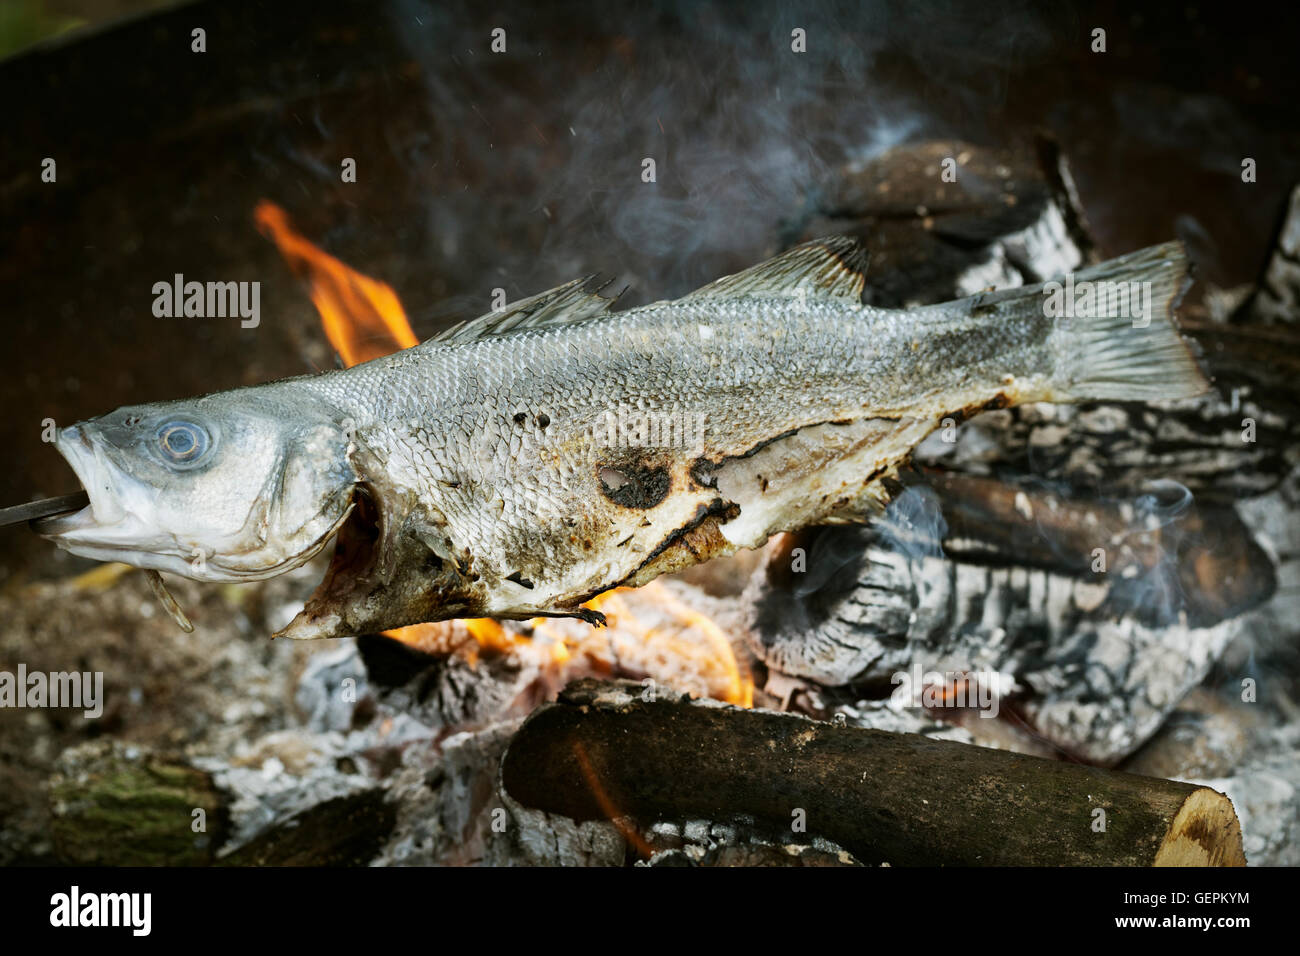 Whole fish grilled on a barbecue. Stock Photo